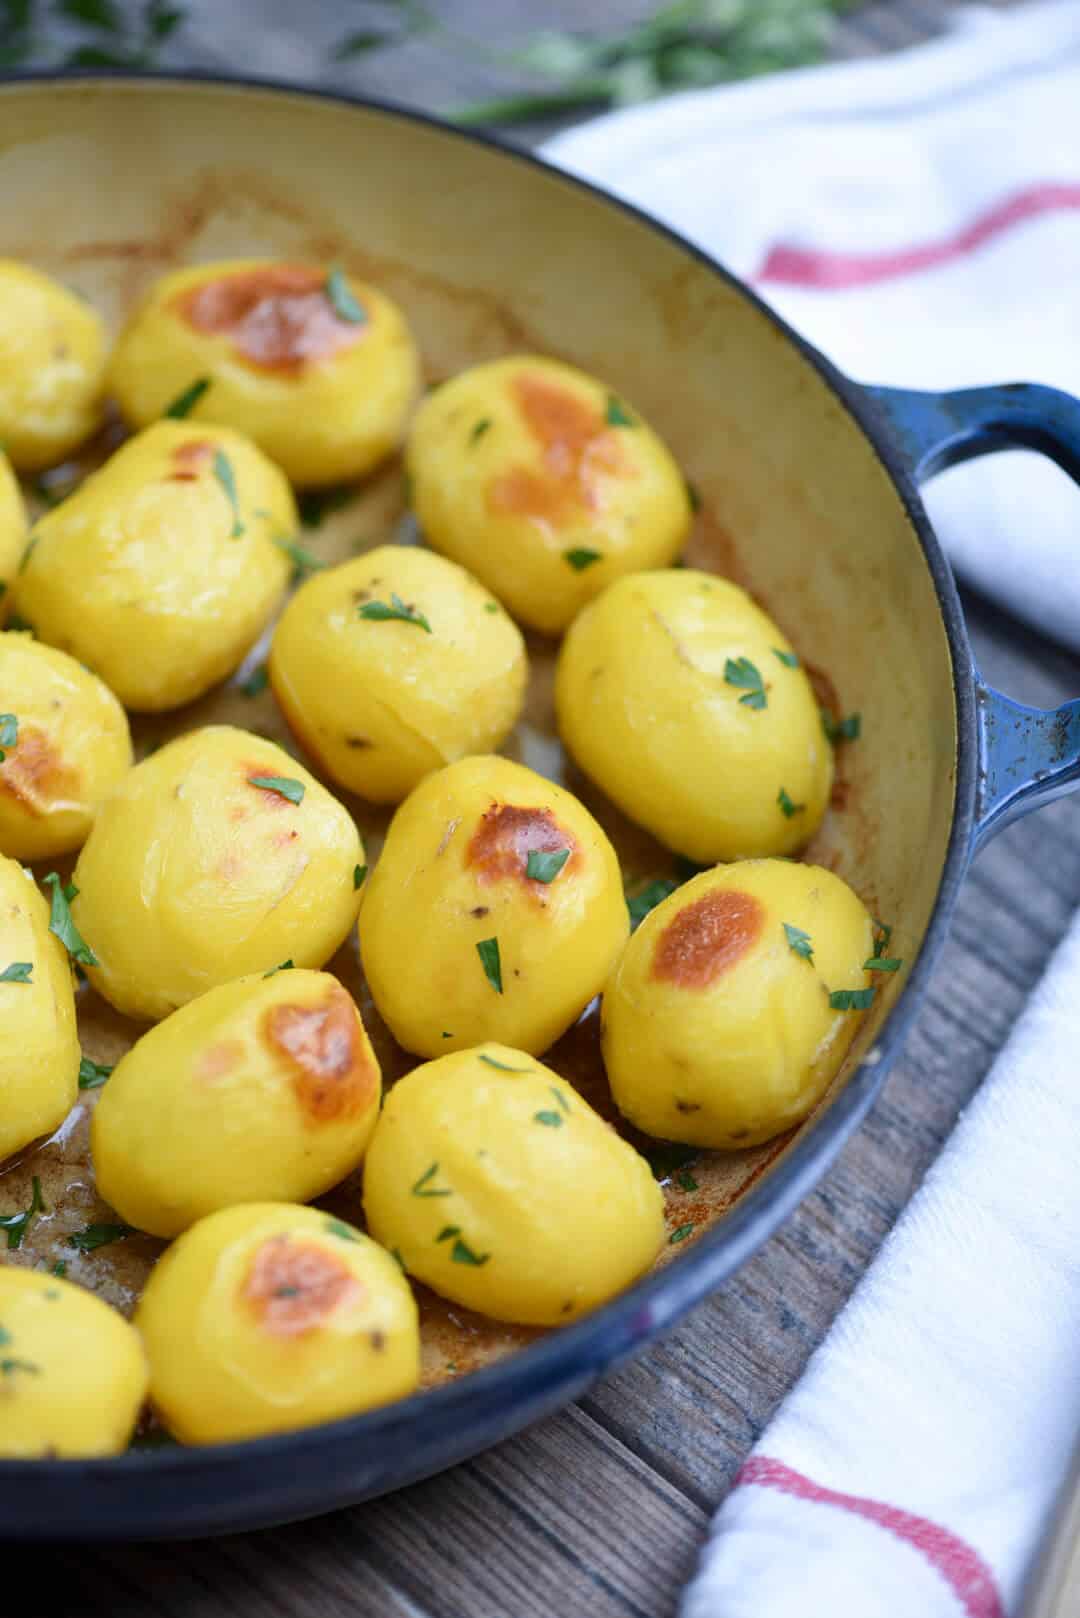 A close up shot of the potatoes from the side.